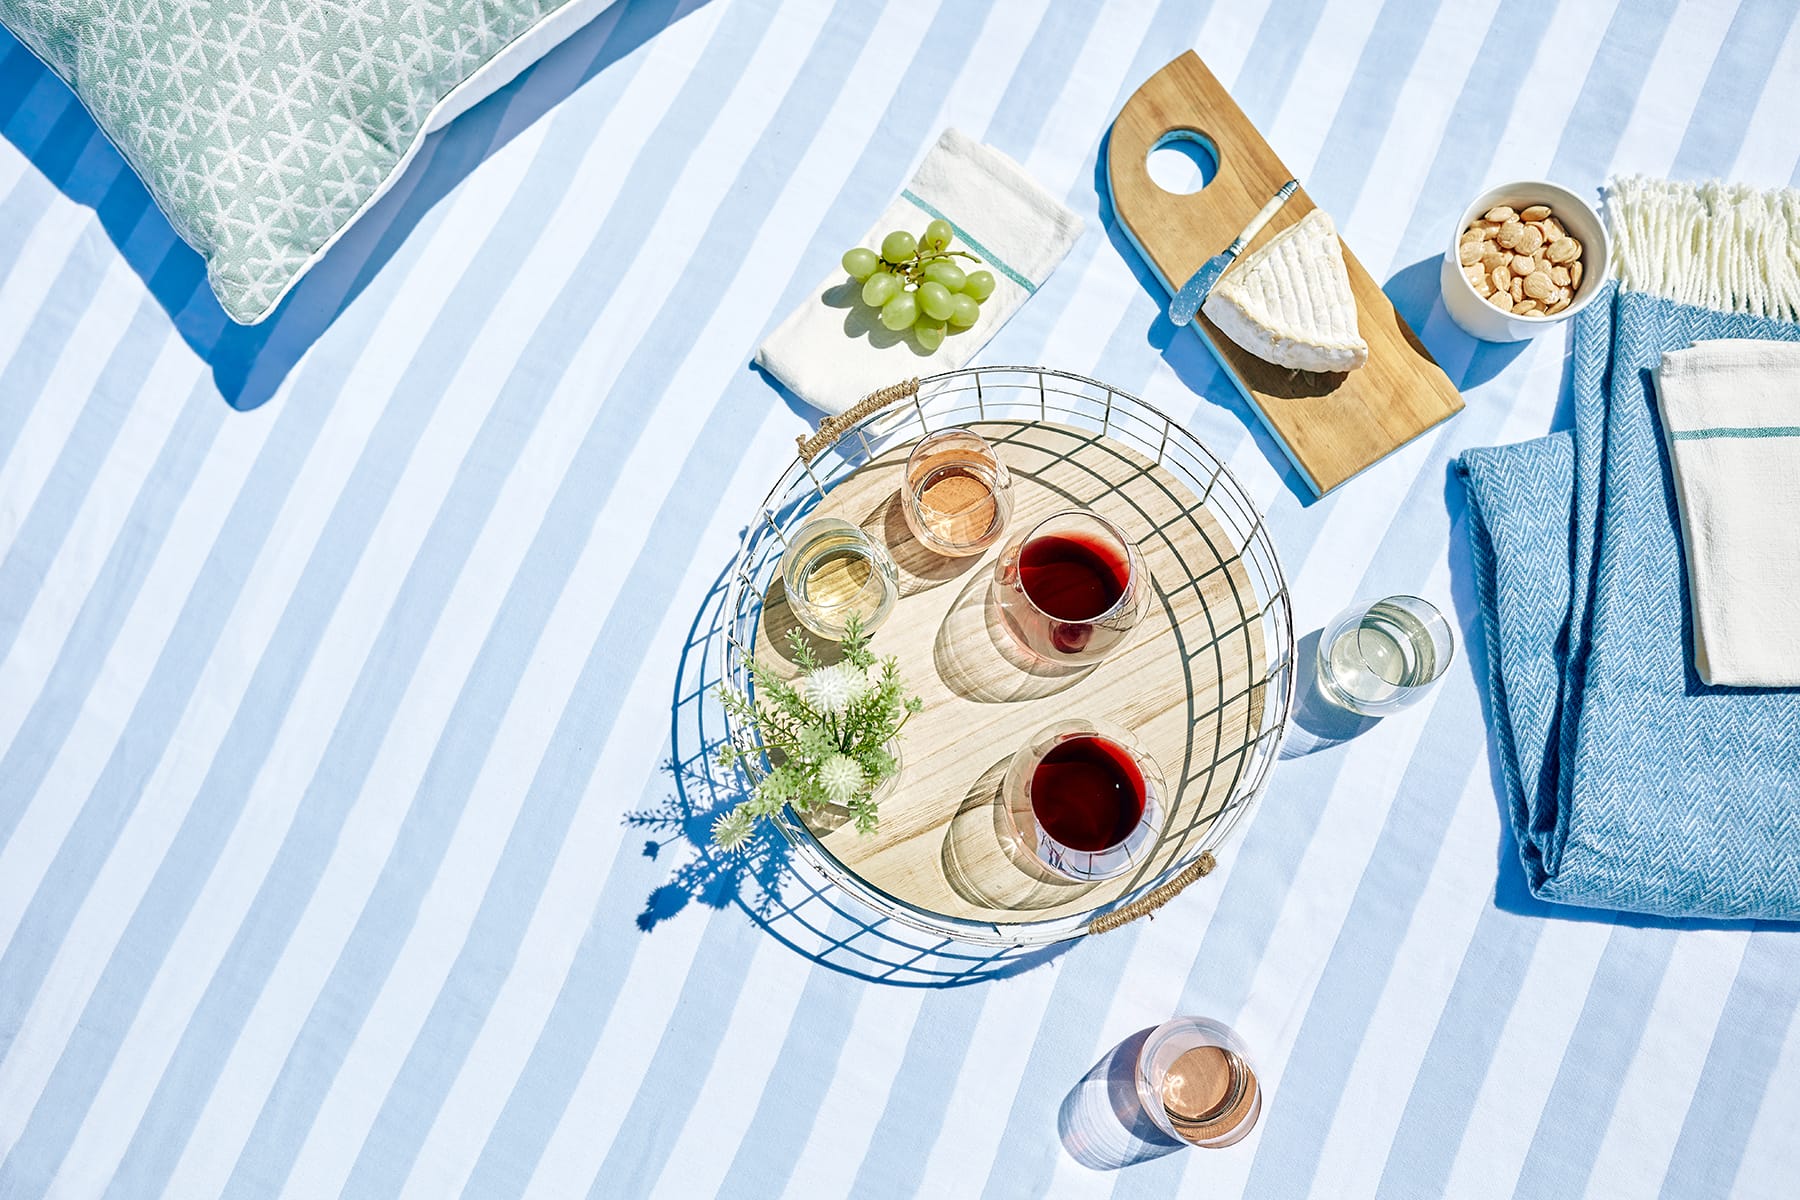 Merriam Wine - Picnic with home wines